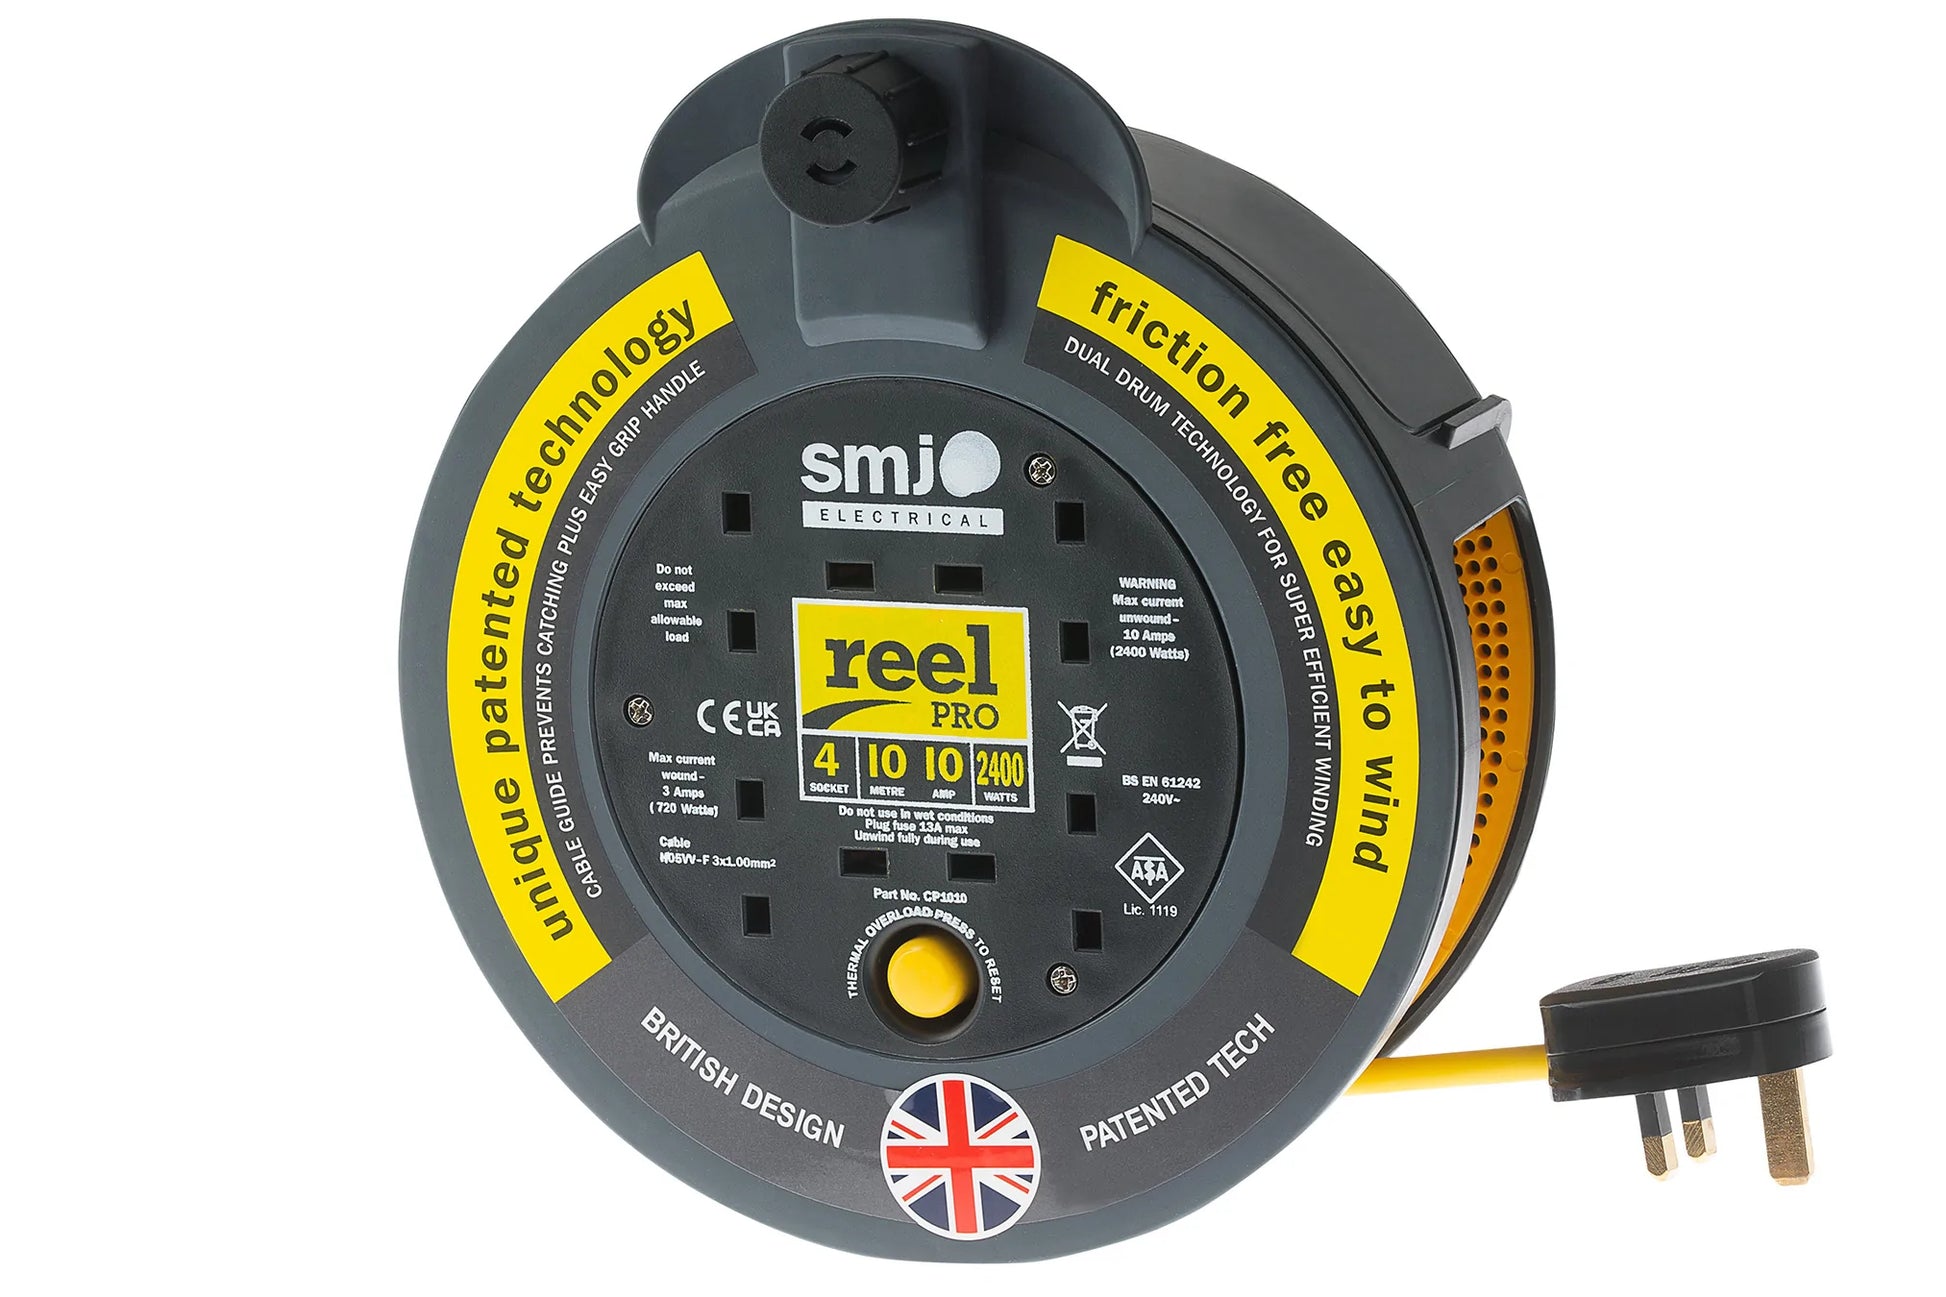 SMJ Electrical 4 Socket ReelPro Cassette 10A Friction Free Cable Reel - 10m - maplin.co.uk